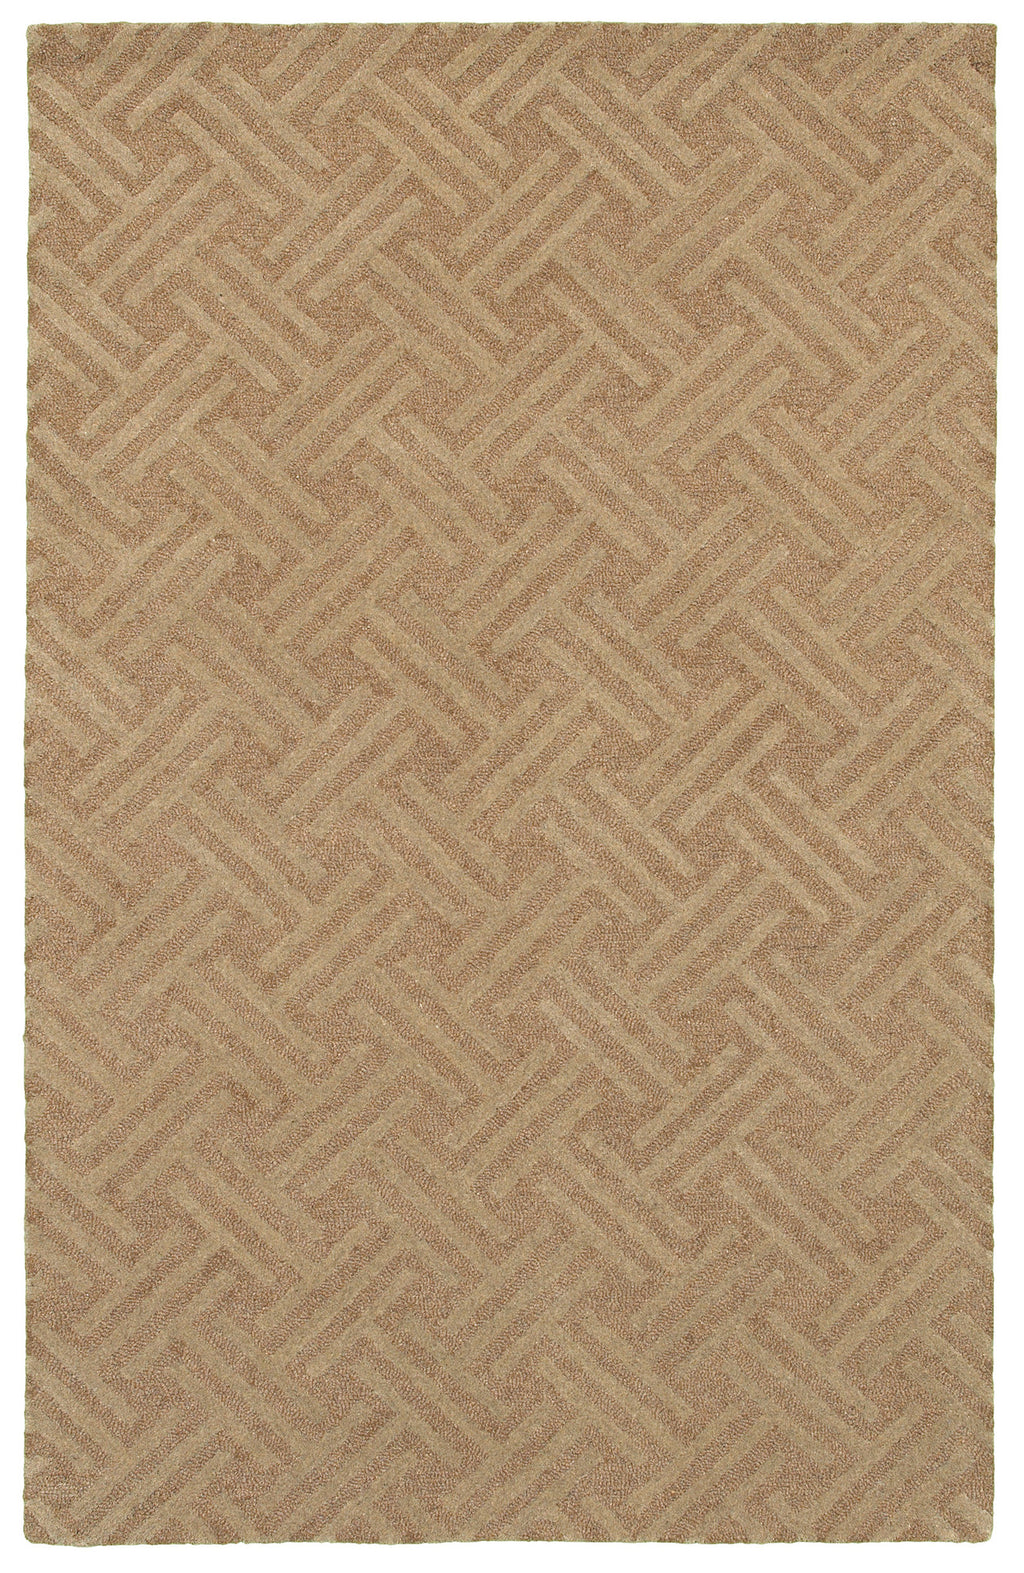 LR Resources Dazzle 54019 Sand Hand Hooked Area Rug 5' X 7'9''